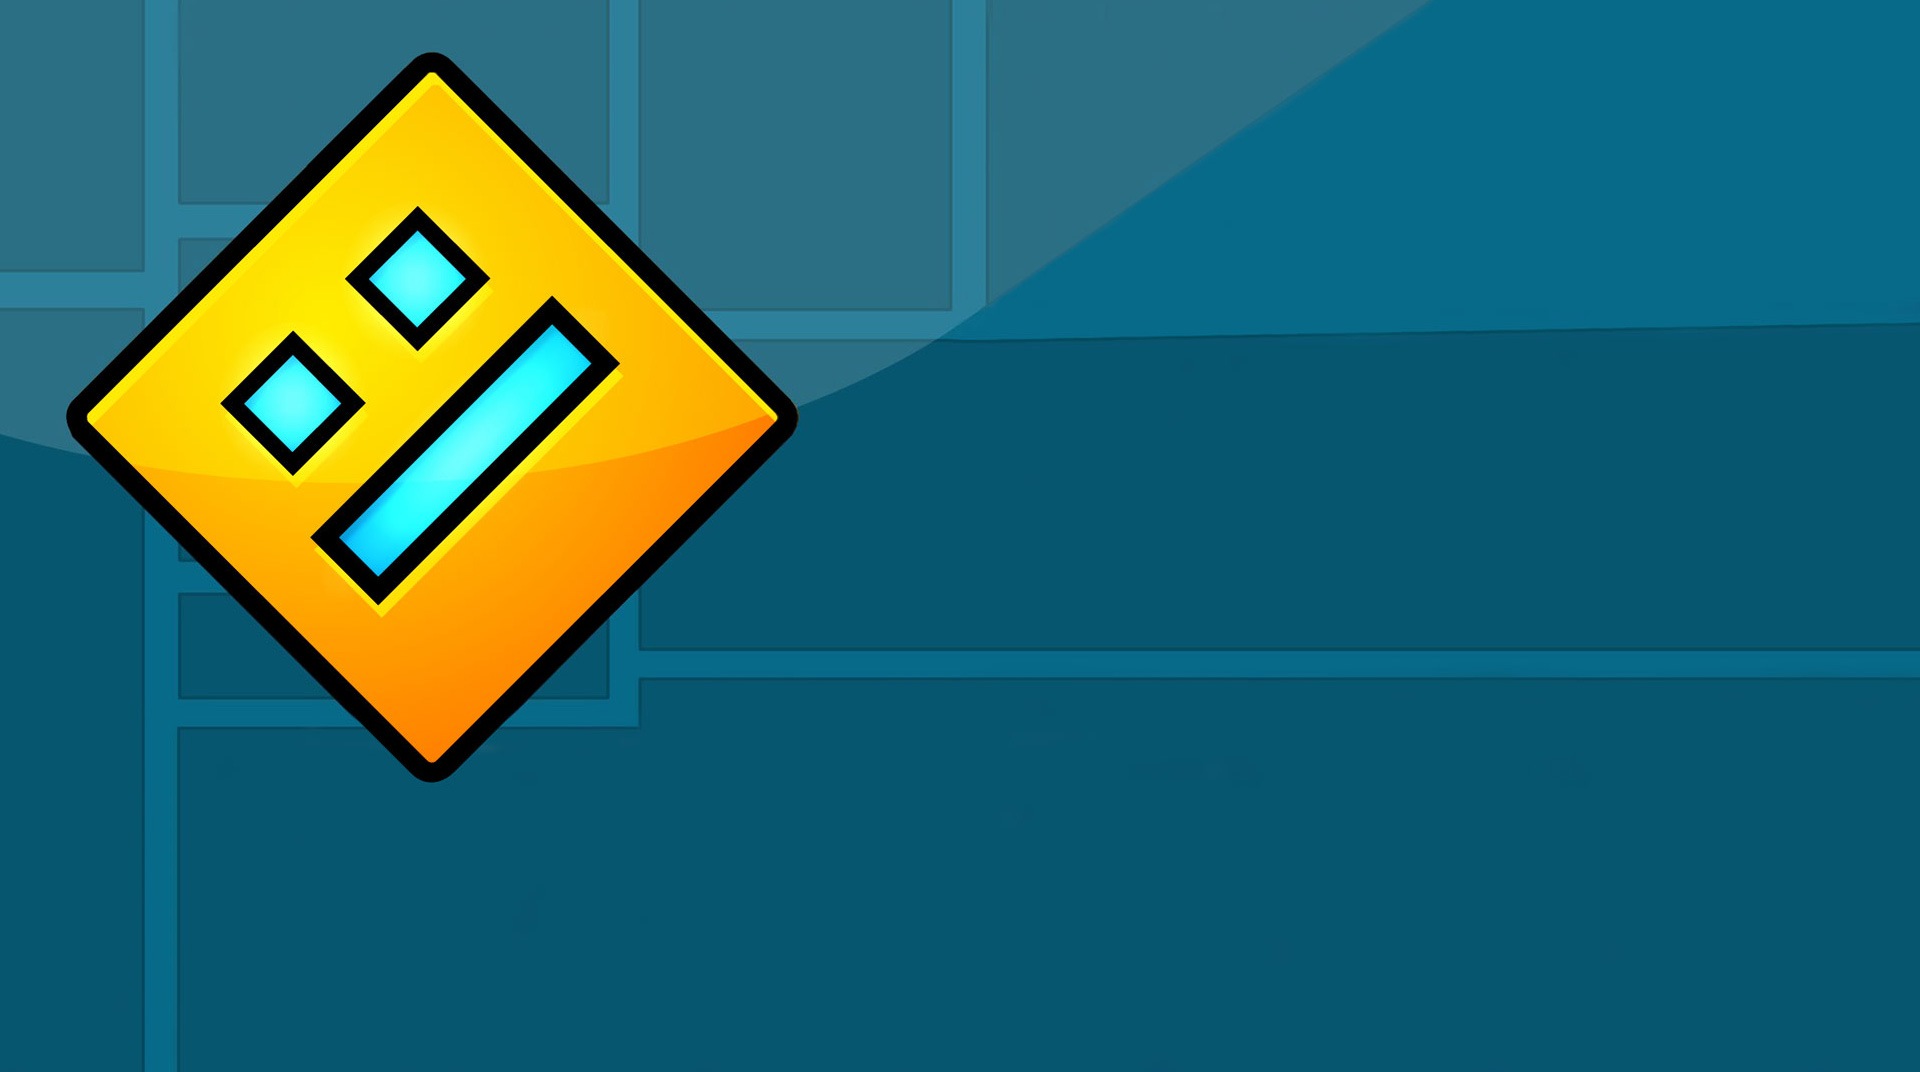 Geometry dash lite download pc call of duty on pc download